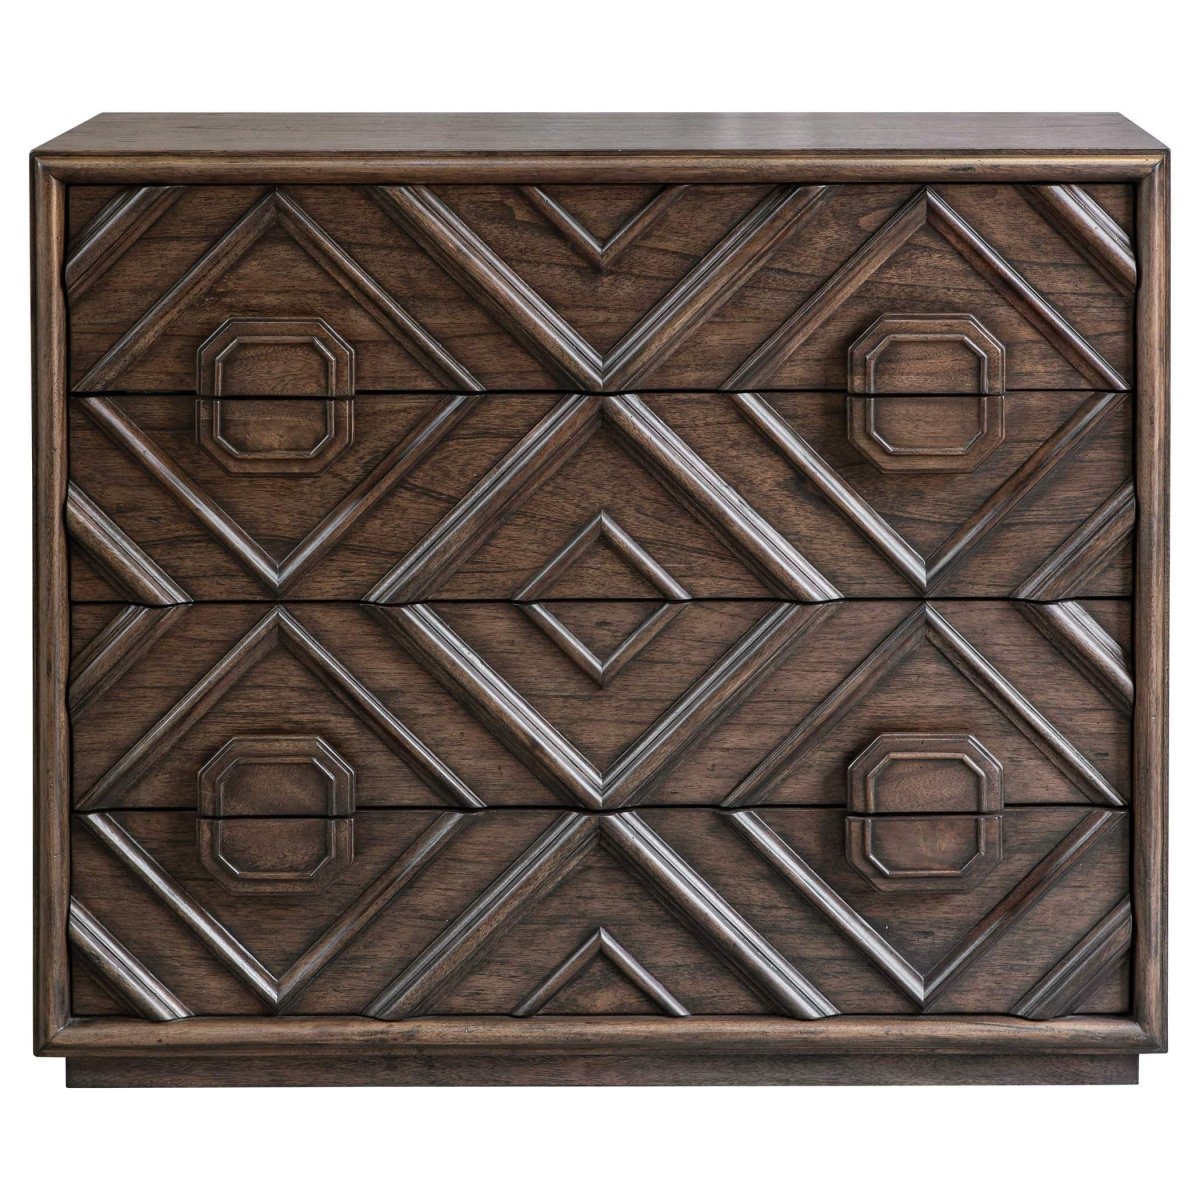 Mindra transitional 4 Door Chest - Uttermost - Storage Chests by Modest Hut